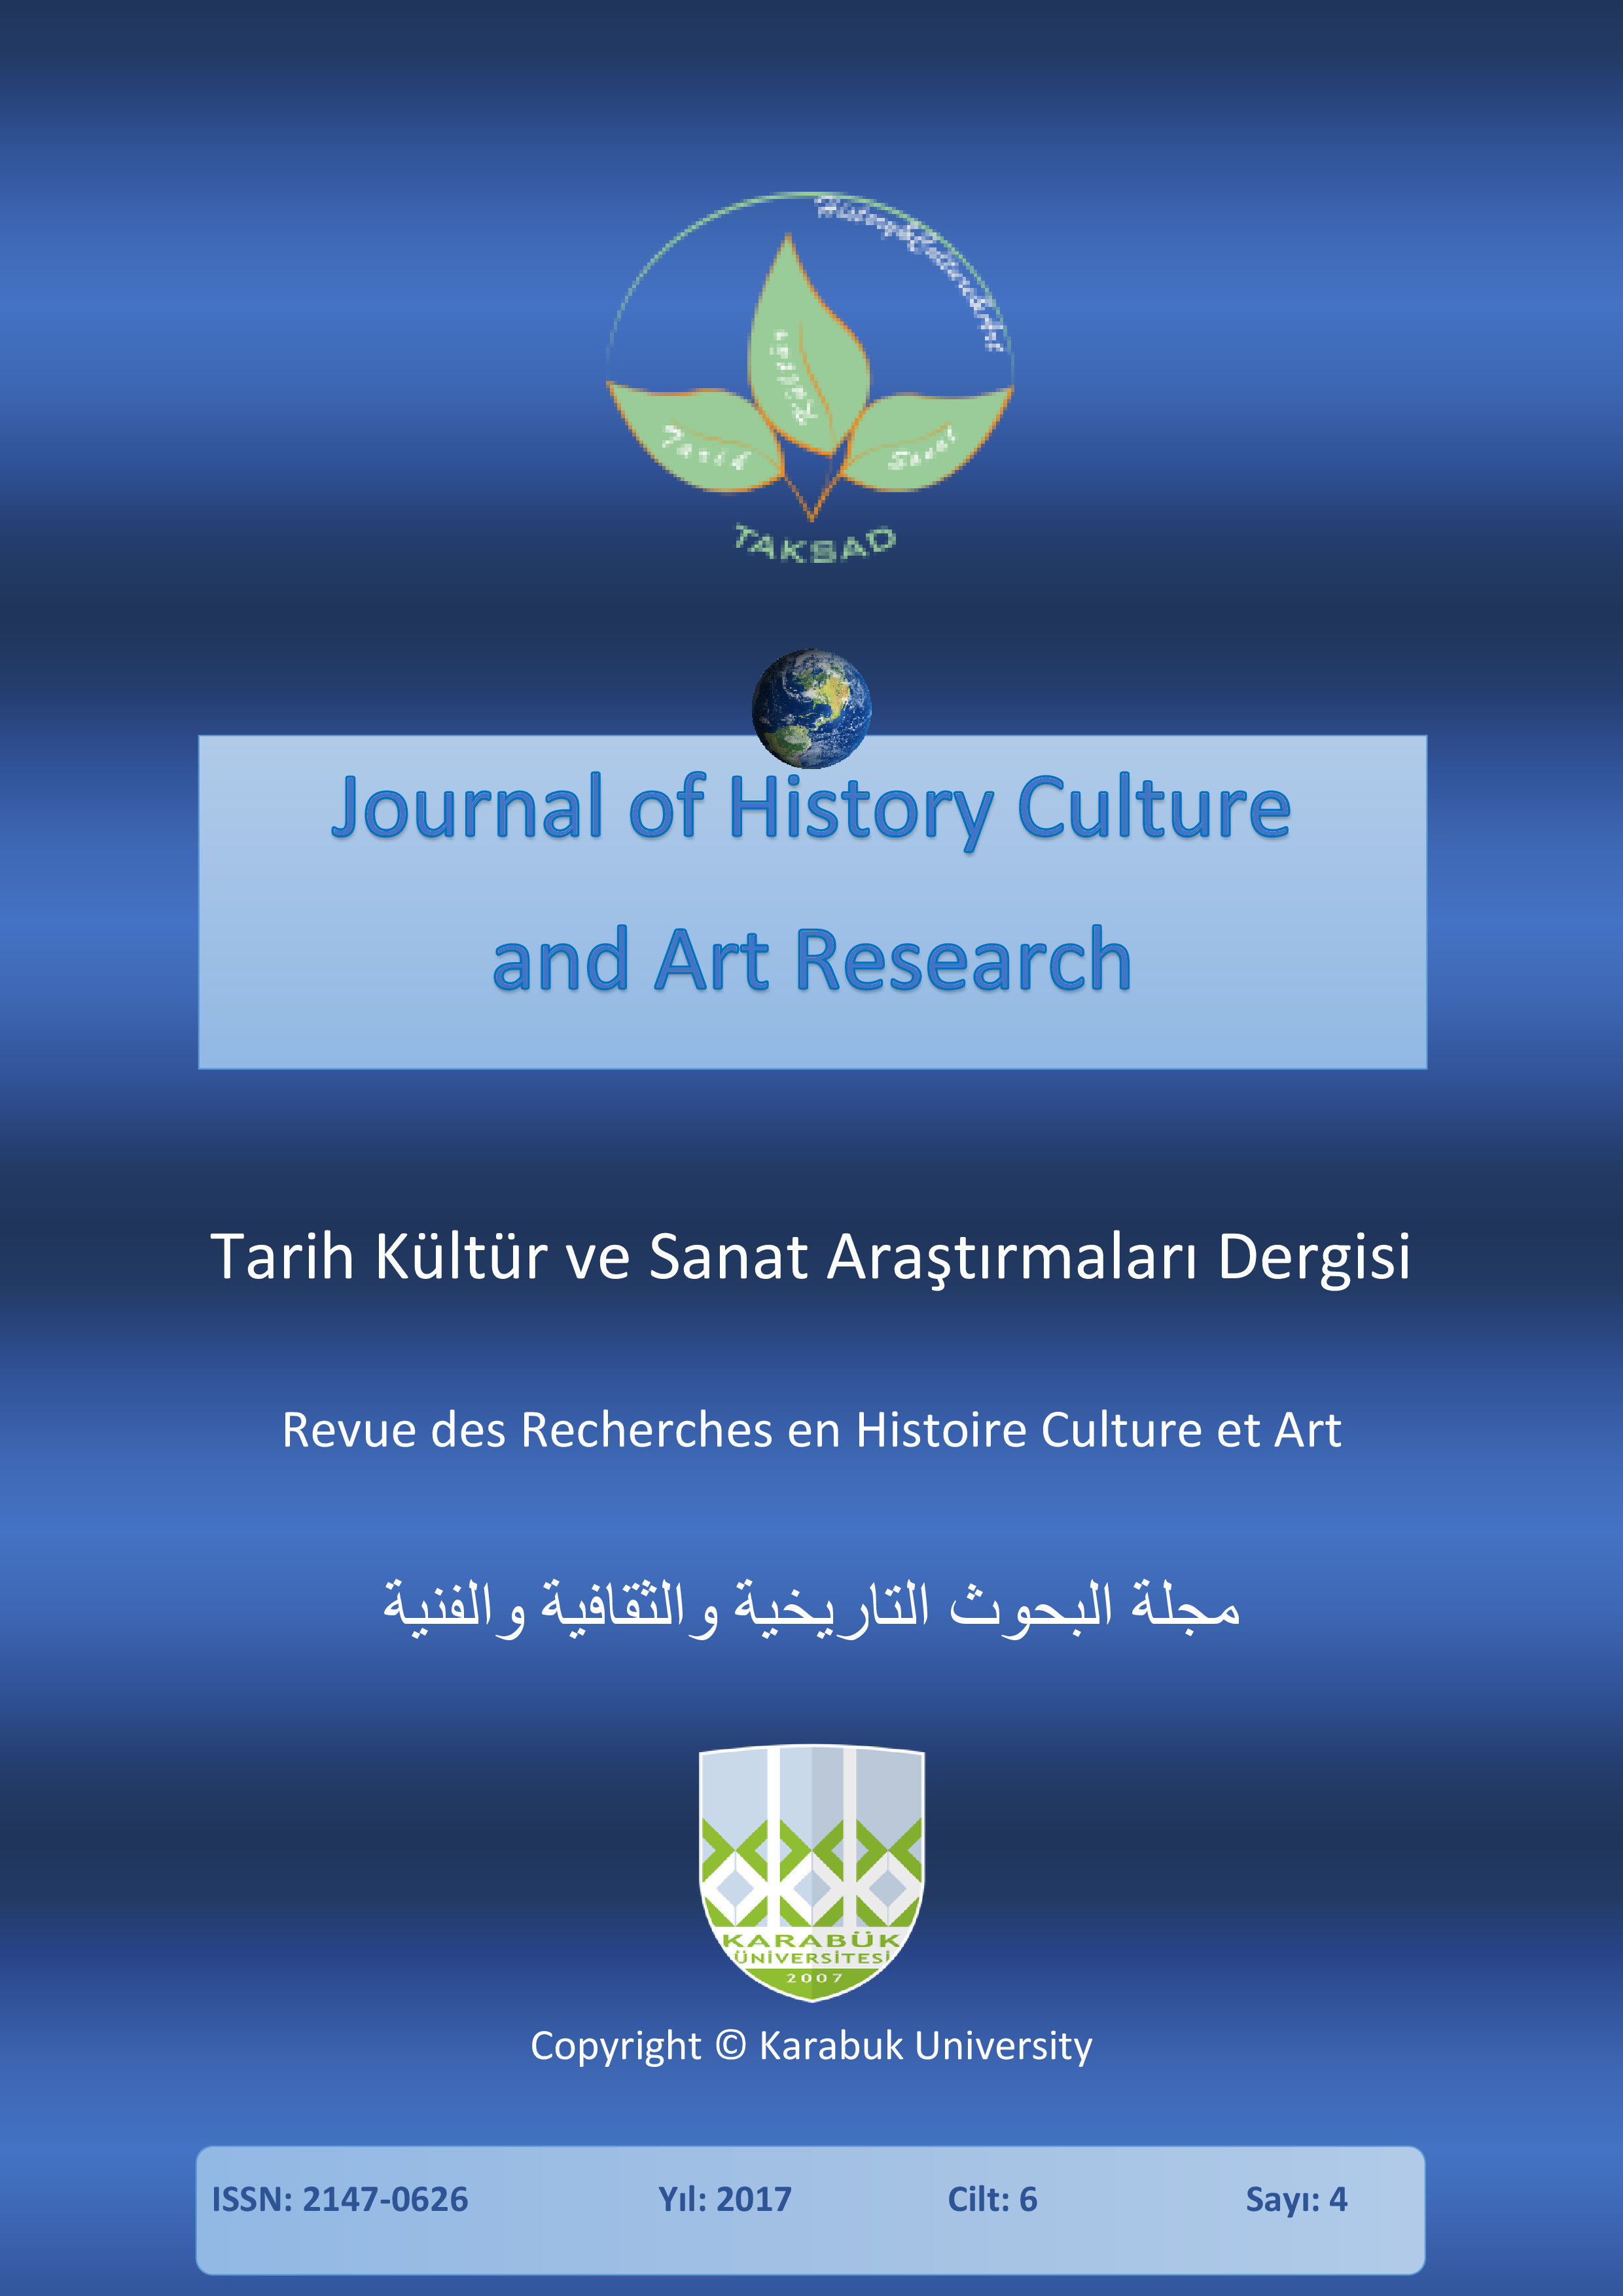 					View Vol. 6 No. 4 (2017): Journal of History Culture and Art Research 6(4)
				